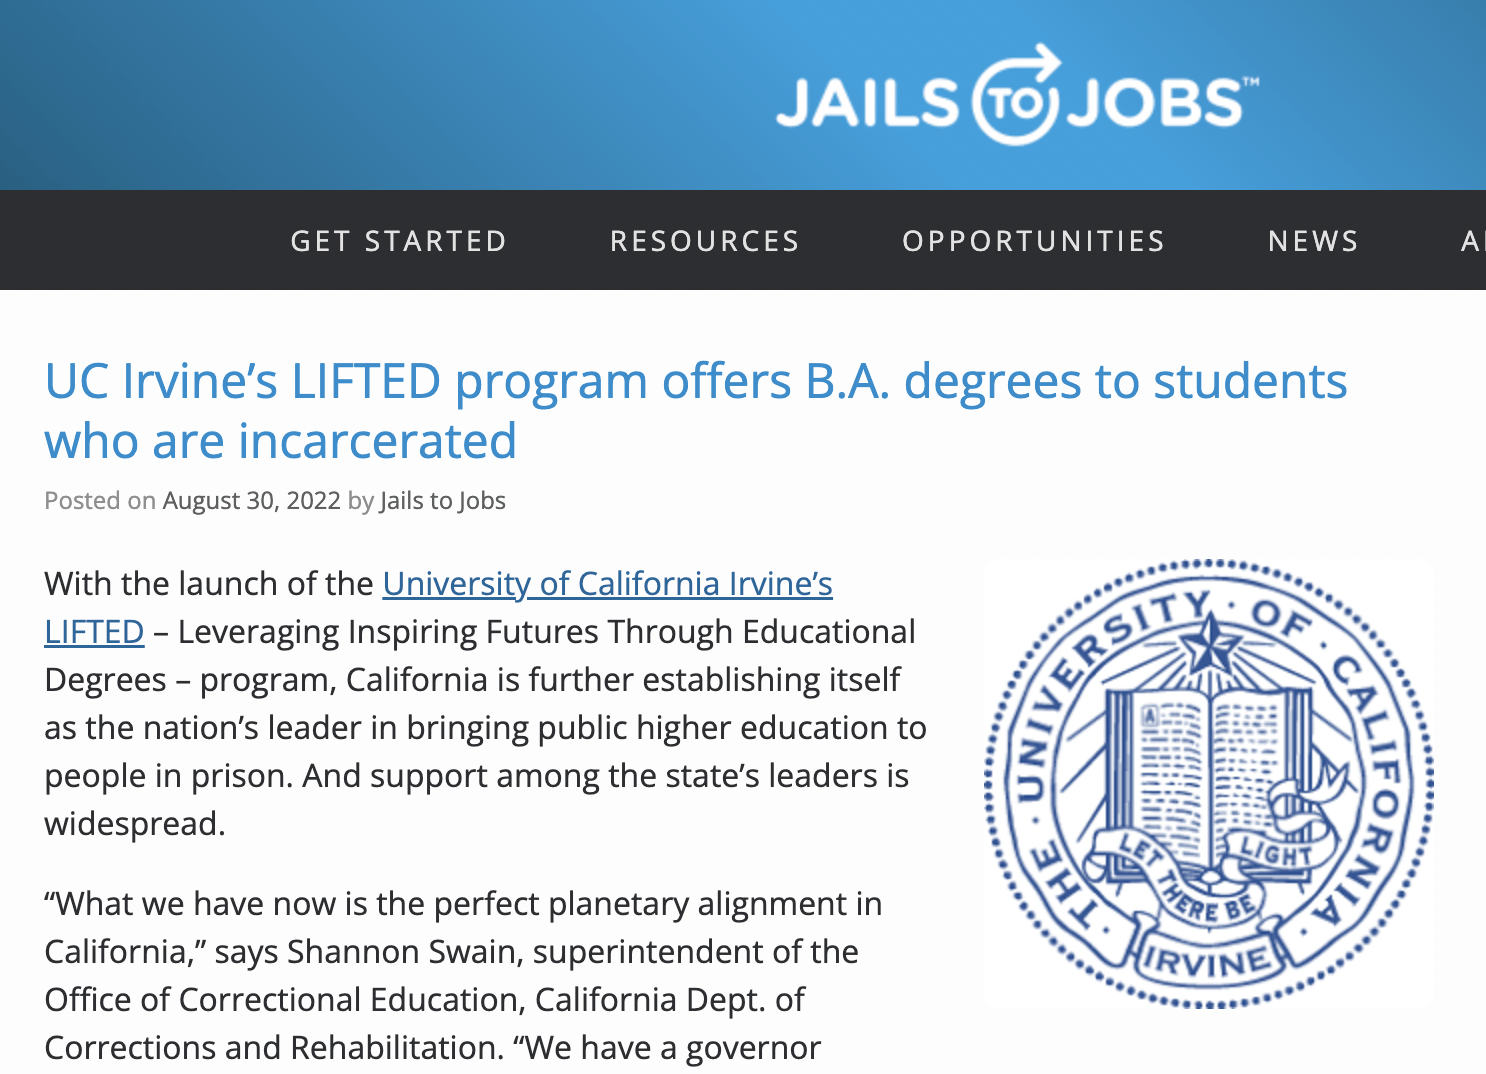 UC Irvine’s LIFTED program offers B.A. degrees to students who are incarcerated